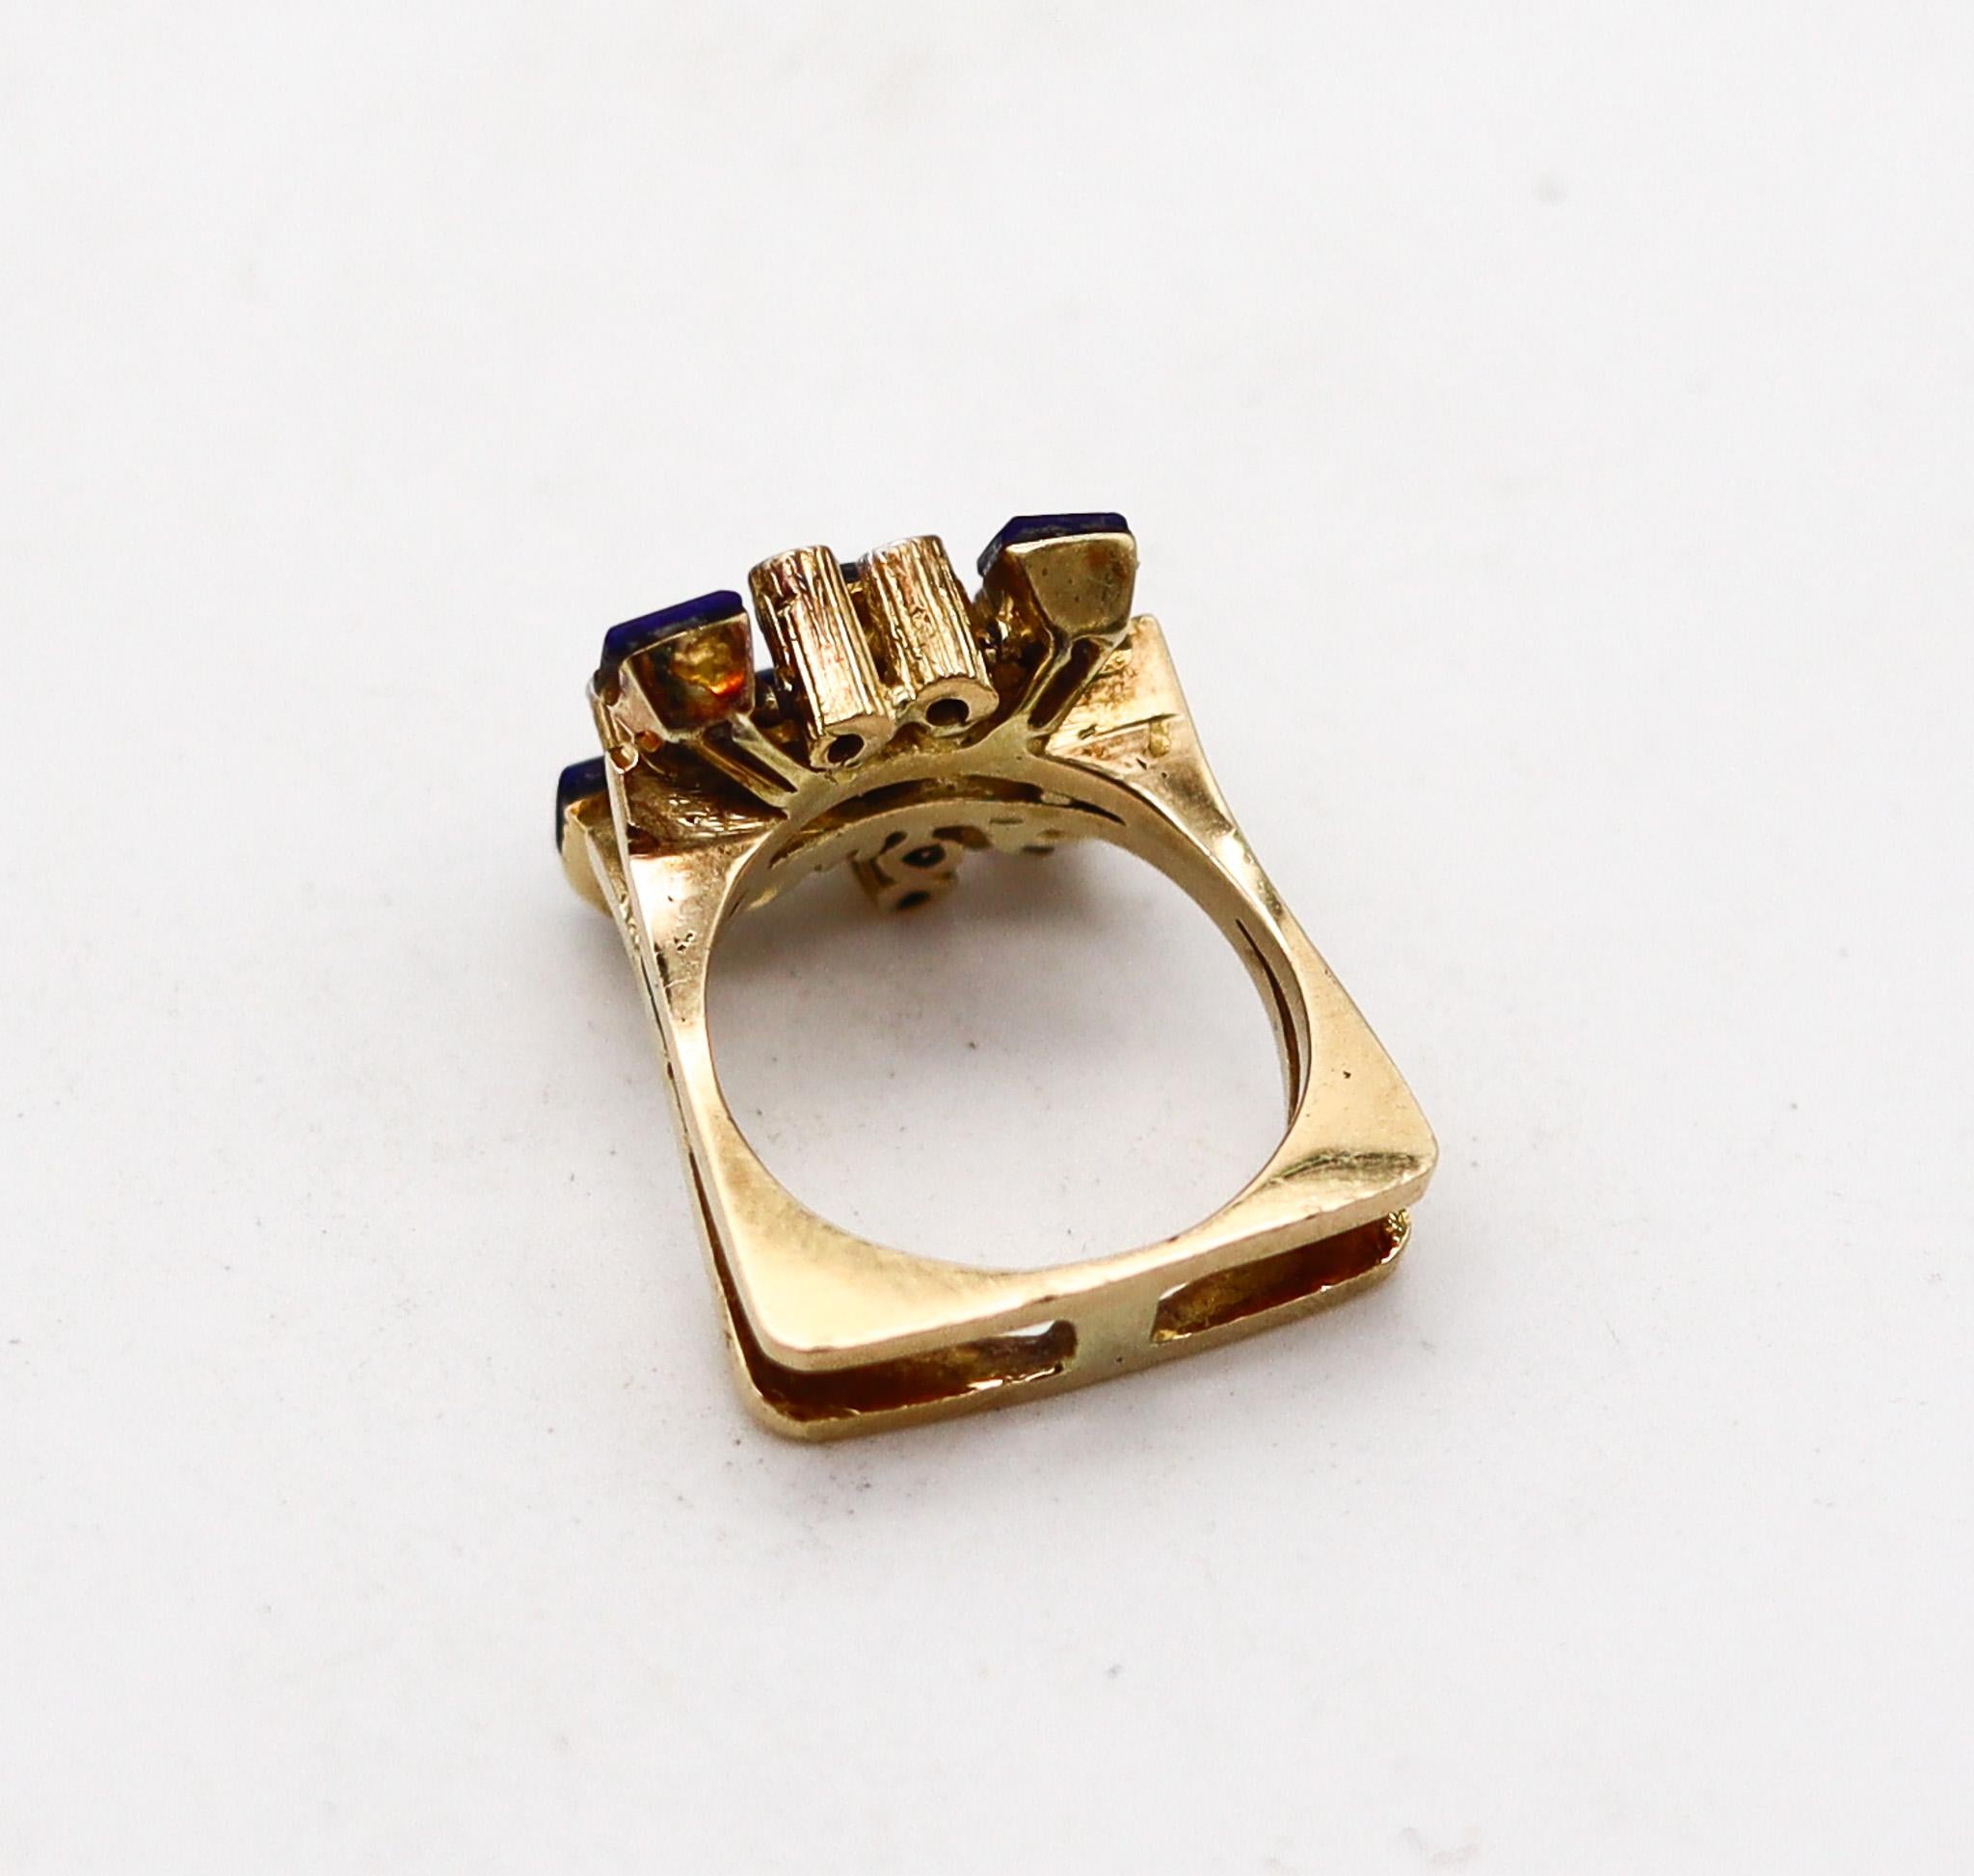 Women's or Men's Danish 1970 Geometric Ring In 14Kt Yellow Gold With Diamonds And Lapis Lazuli For Sale